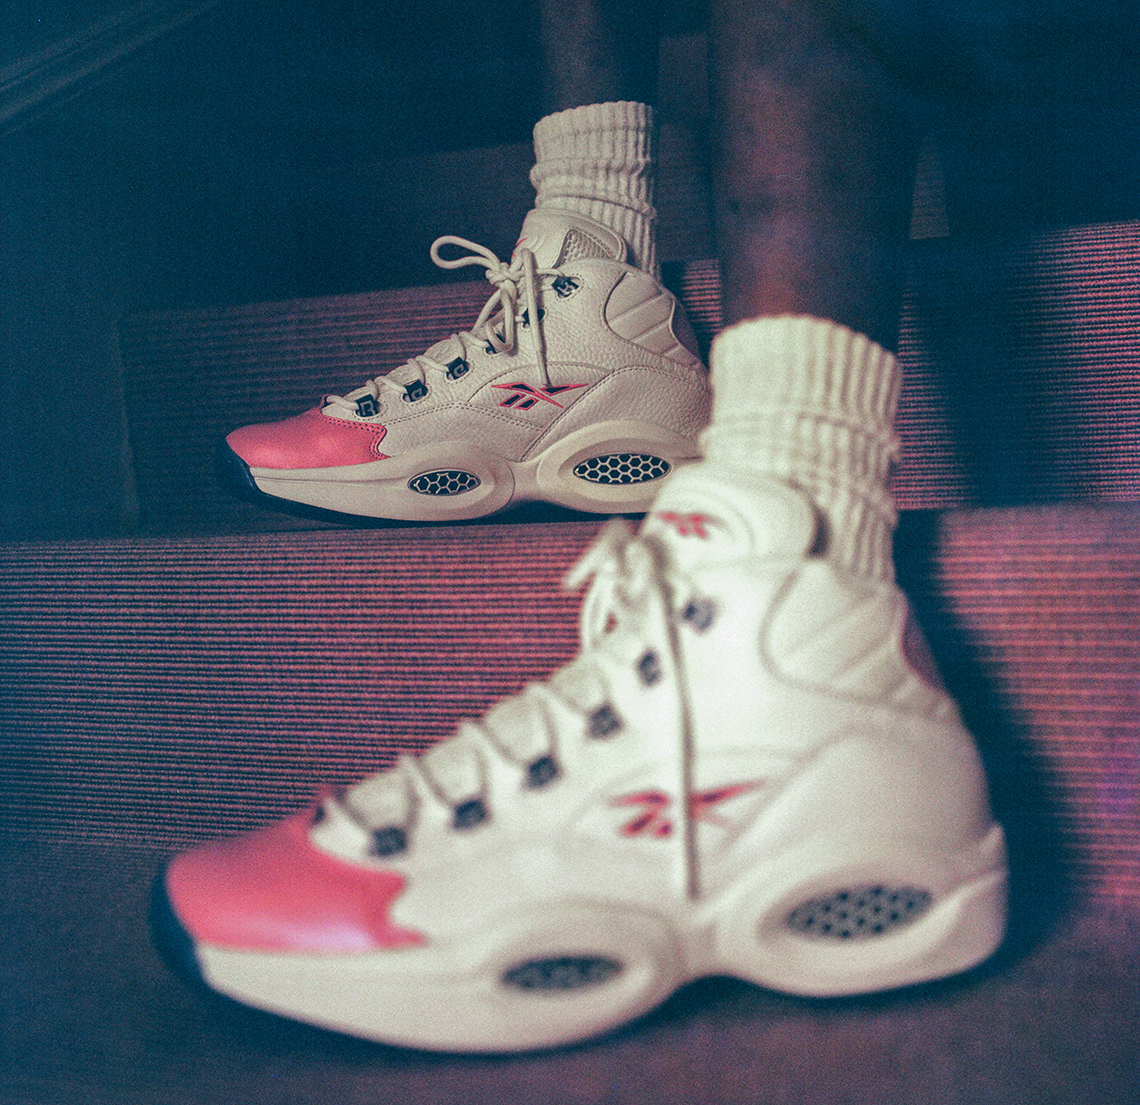 Eric Emanuel Reebok Question Mid White Pink 1